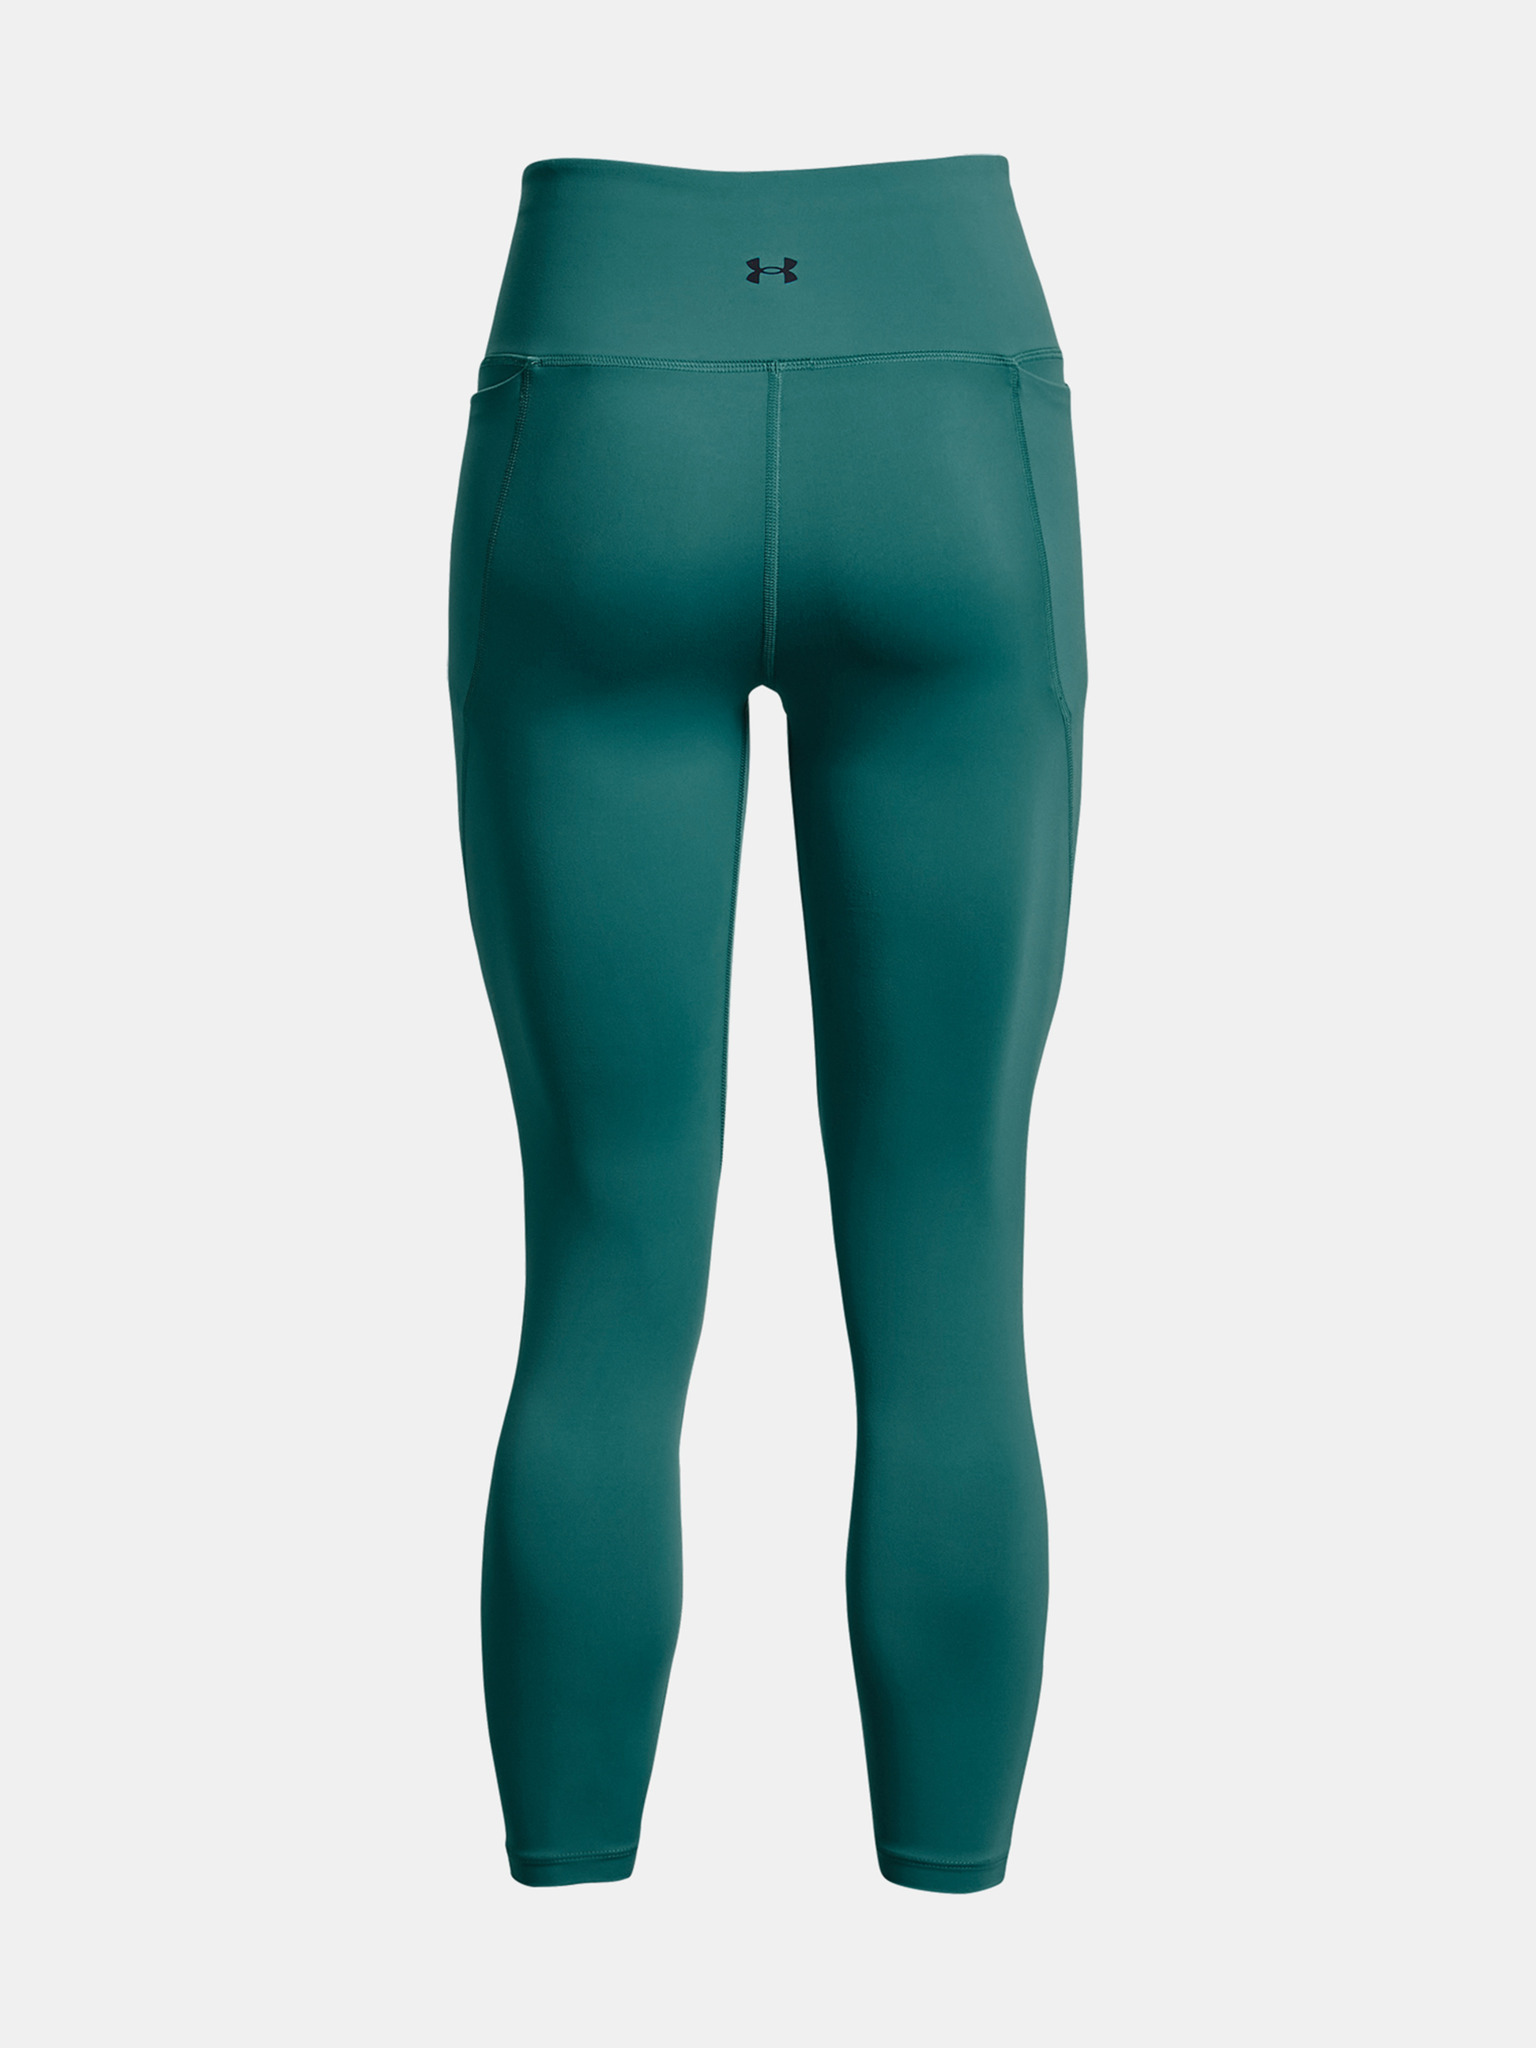 Womens compression 7/8 leggings Under Armour PJT RCK LG CLRBLCK ANKL LG W  green